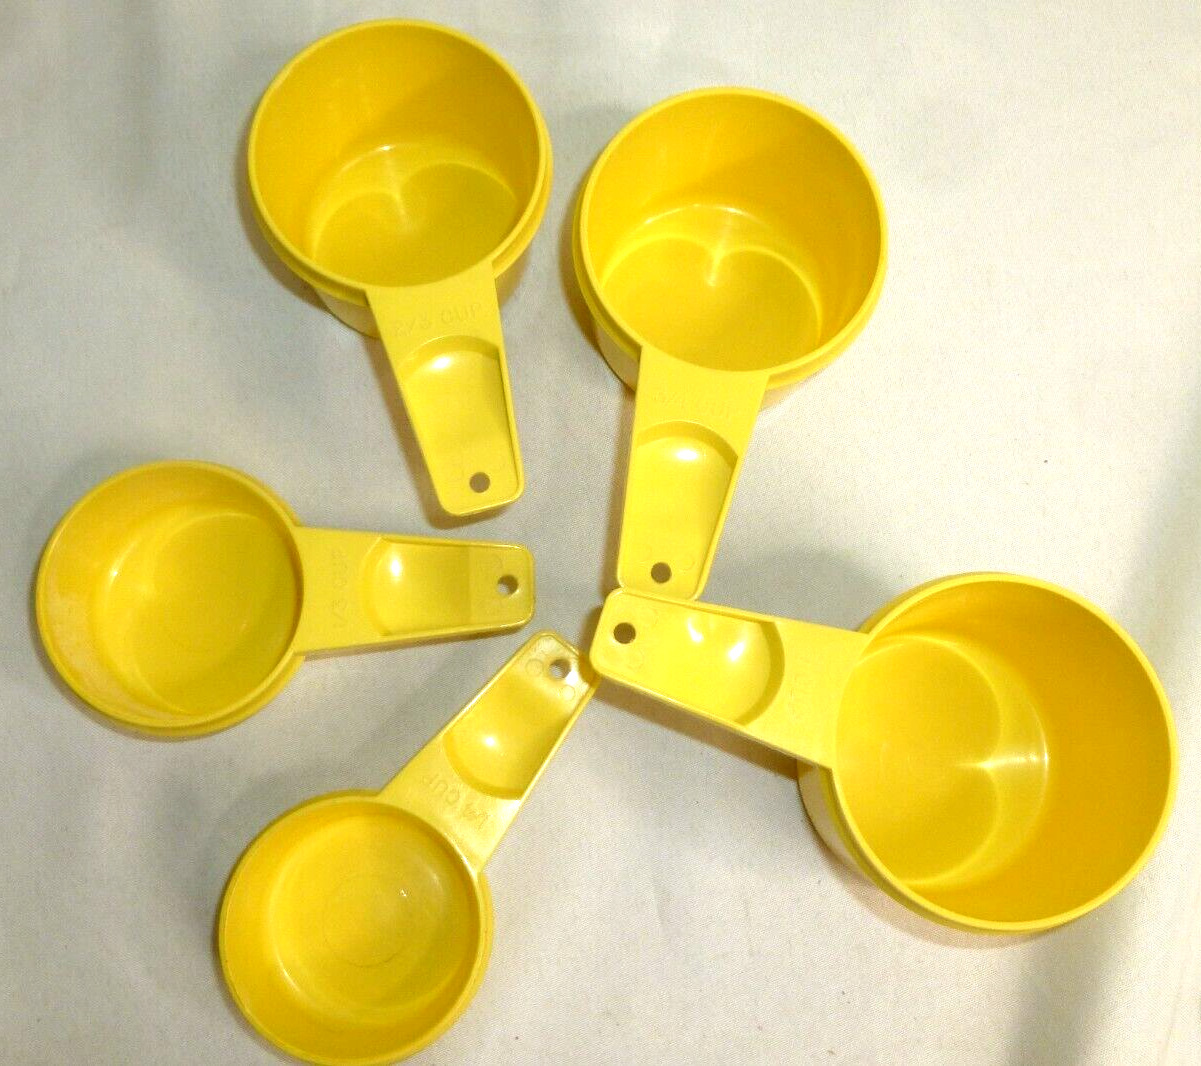 Tupperware Vintage Yellow Measuring Cup Set Of 5 - Missing 1/2 Cup nesting